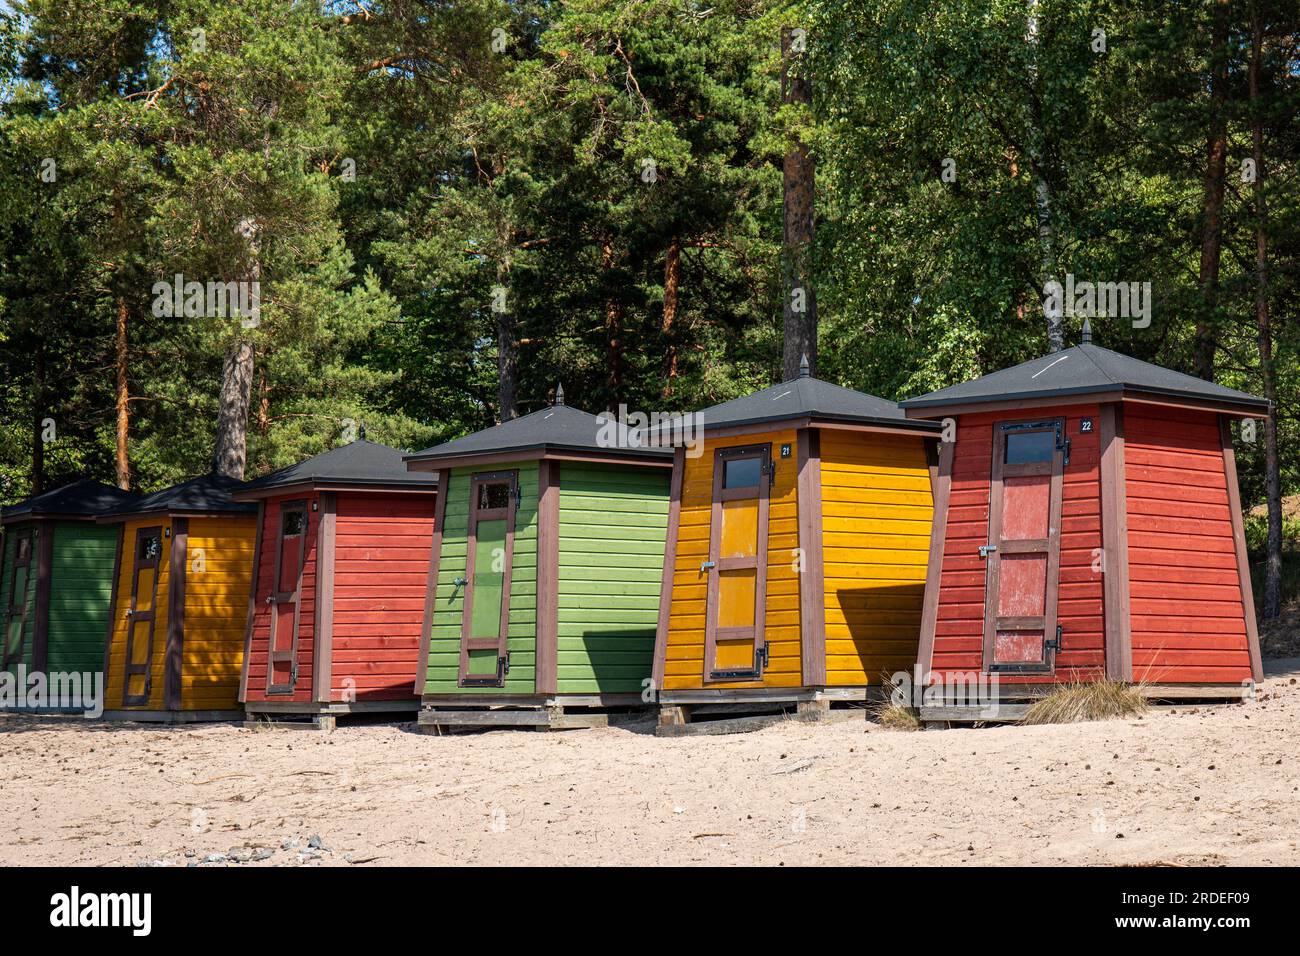 Colorful beach changing rooms or cabins on the sandy beach of Pihlajasaari island. Helsinki, Finland. Stock Photo